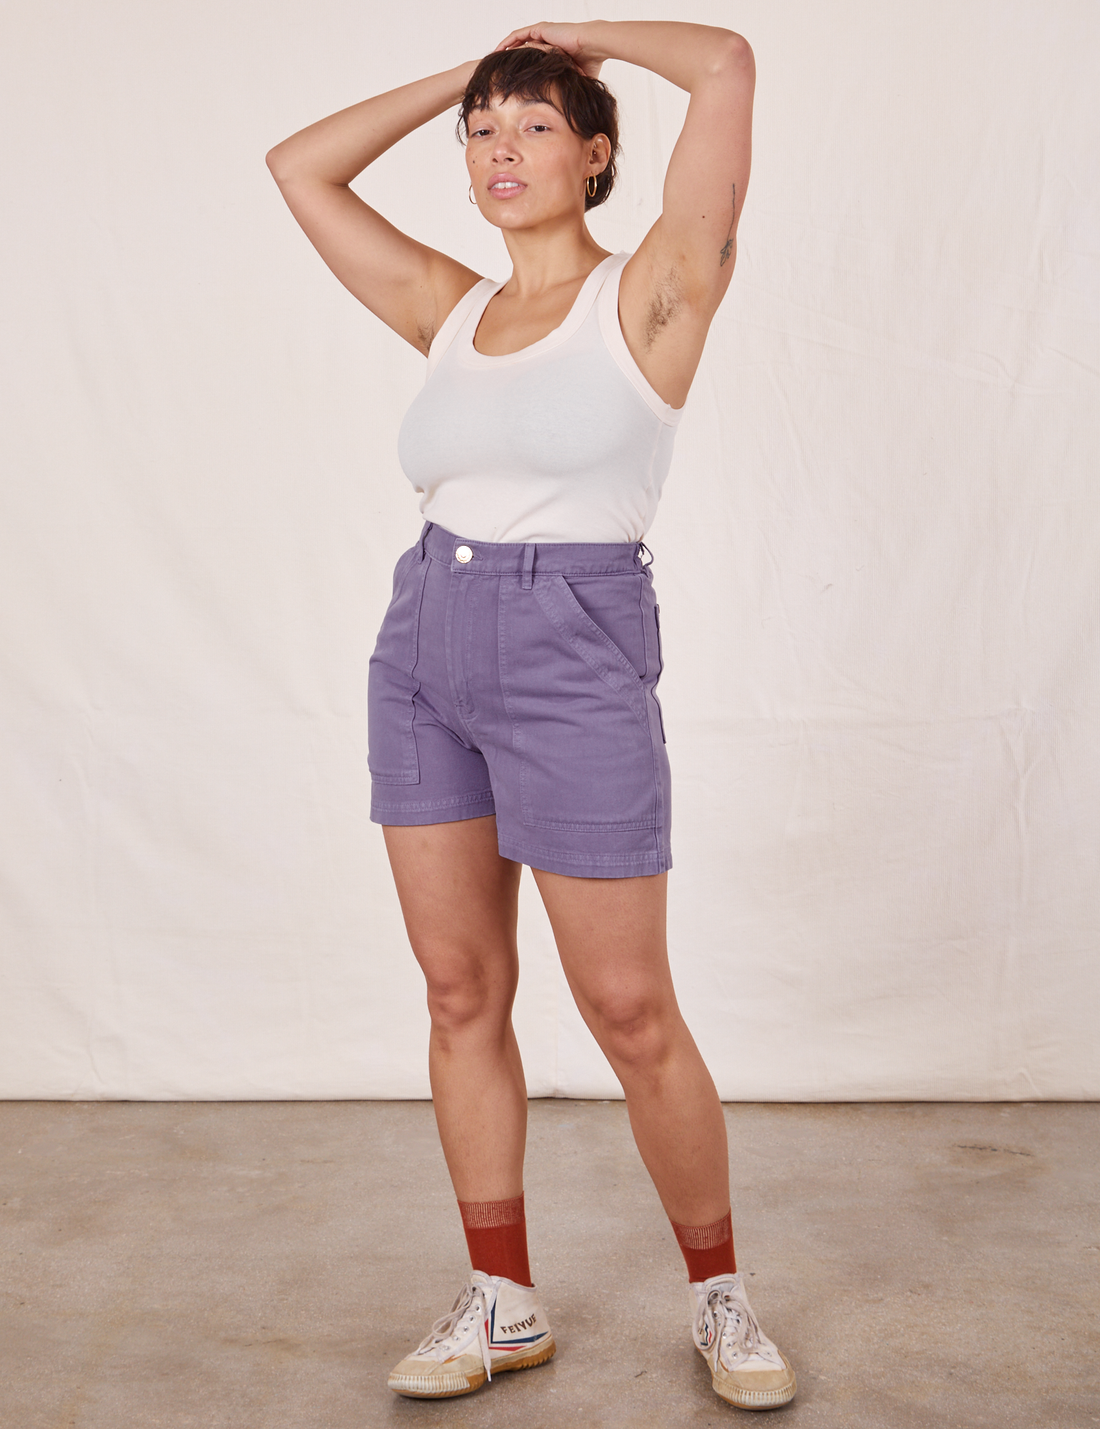 Tiara is wearing Classic Work Shorts in Faded Grape and vintage off-white Tank Top